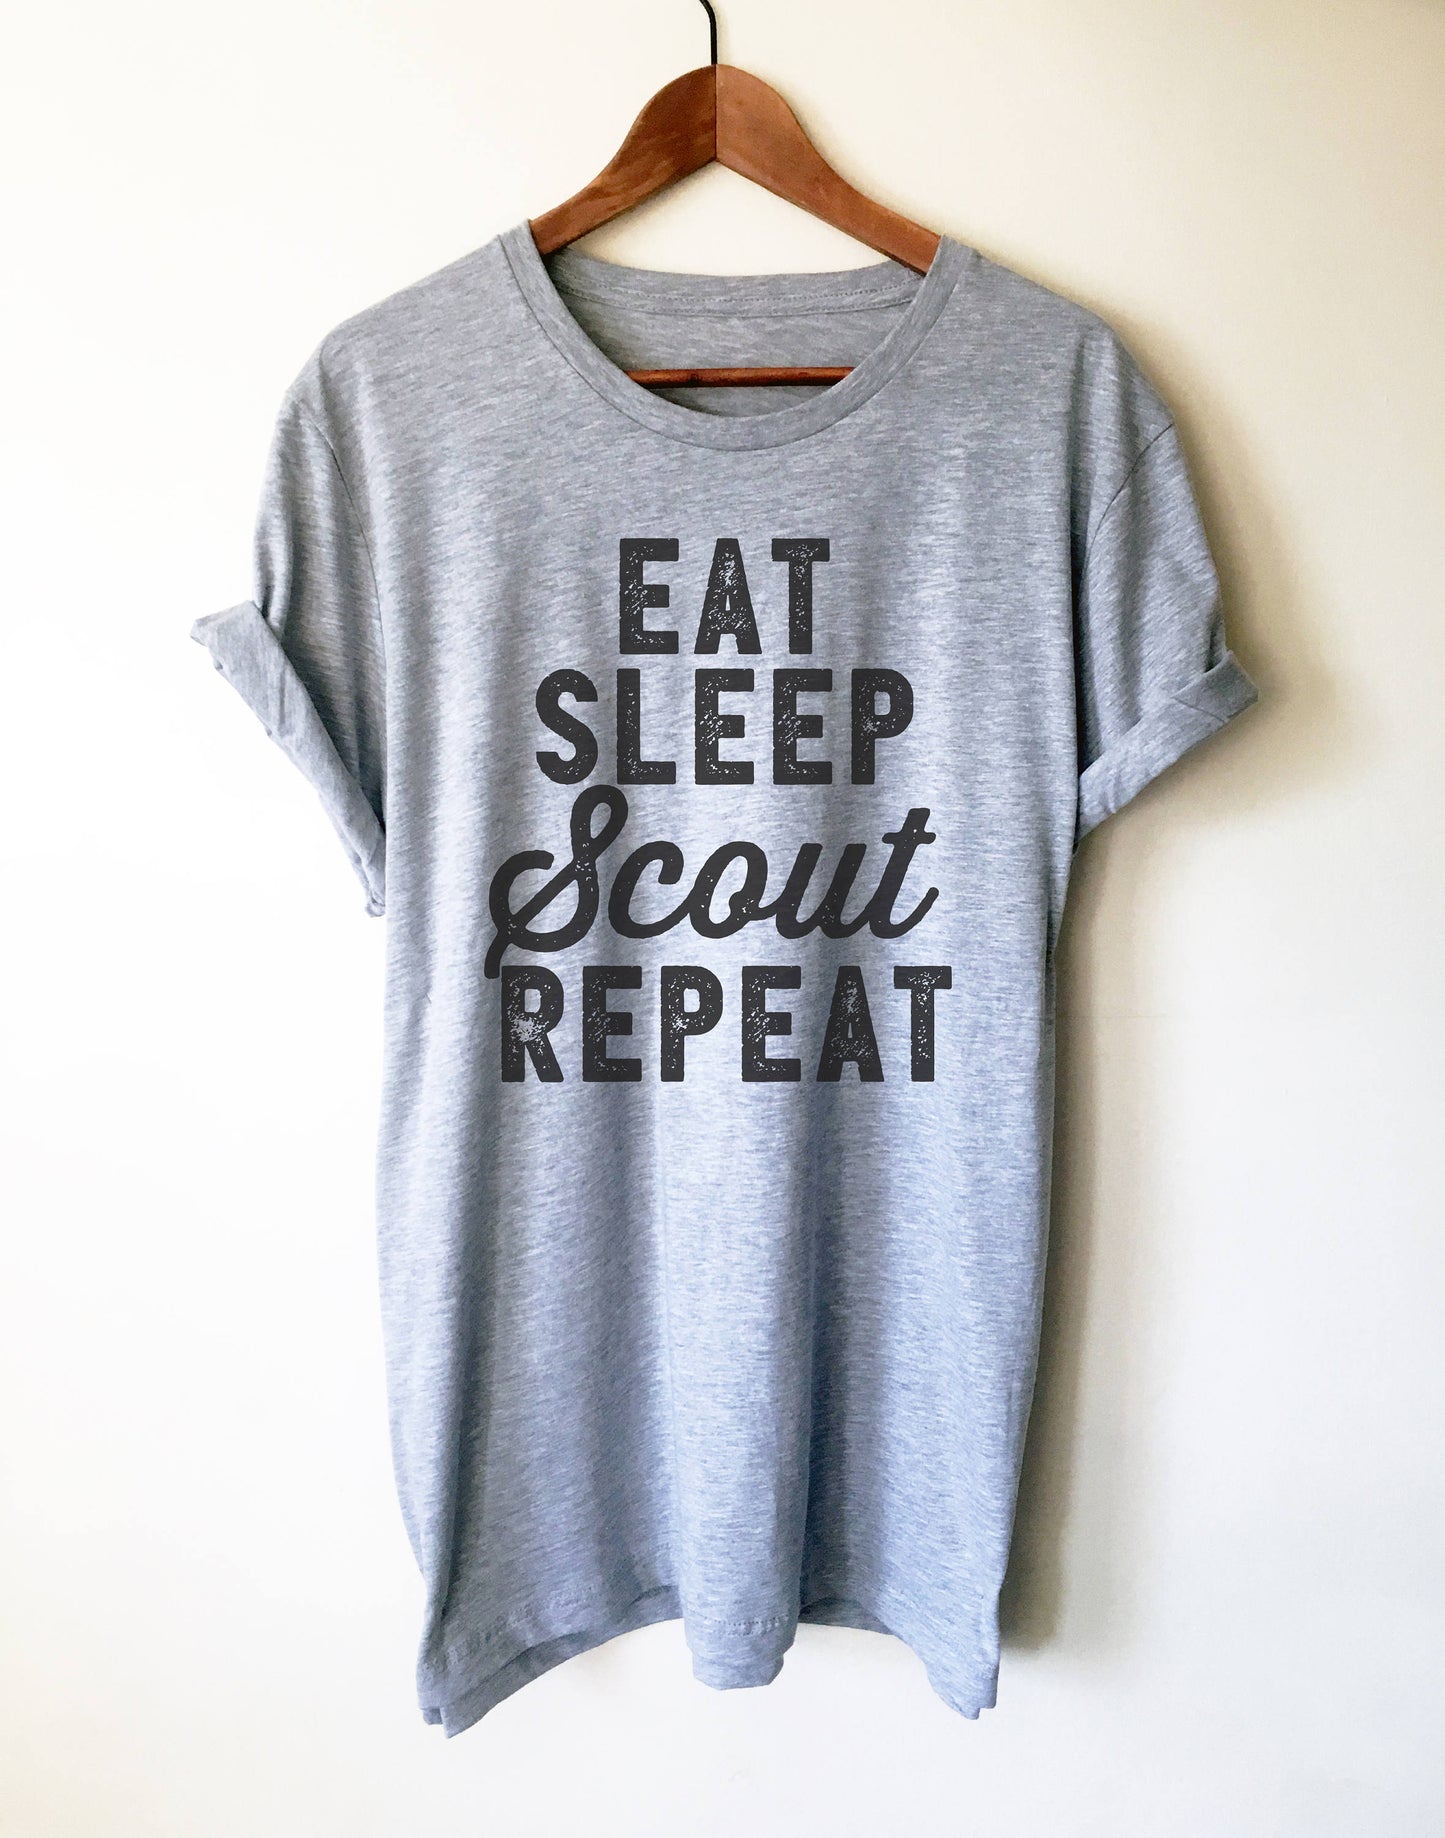 Eat Sleep Scout Repeat Unisex Shirt - Scout shirt, Scout mom shirt, Scout leader, Adventure shirt, Girl scout shirt, Scouting